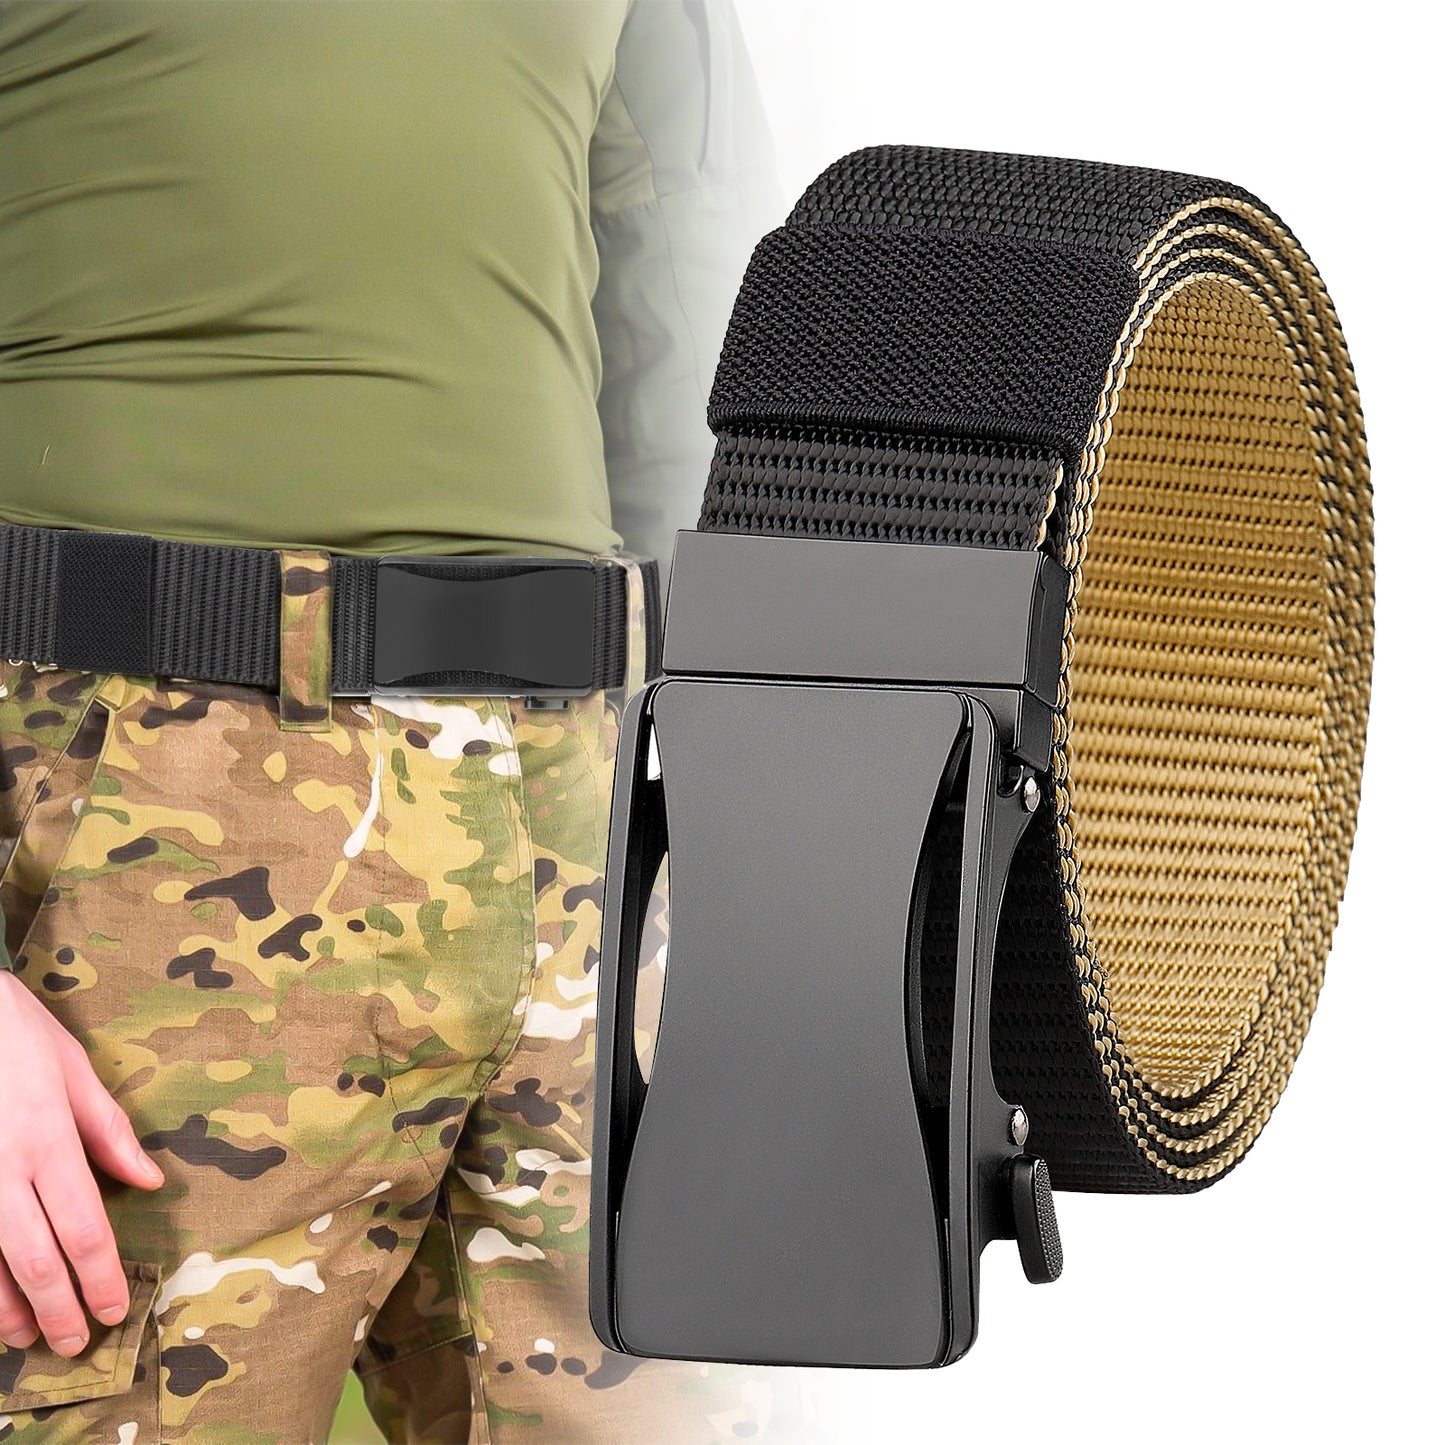 Unisex Military Belt - Tactical nylon strap Waistband Belts with Heavy Duty Quick Release Buckle for Outdoor Hiking School Uniforms for Men Women